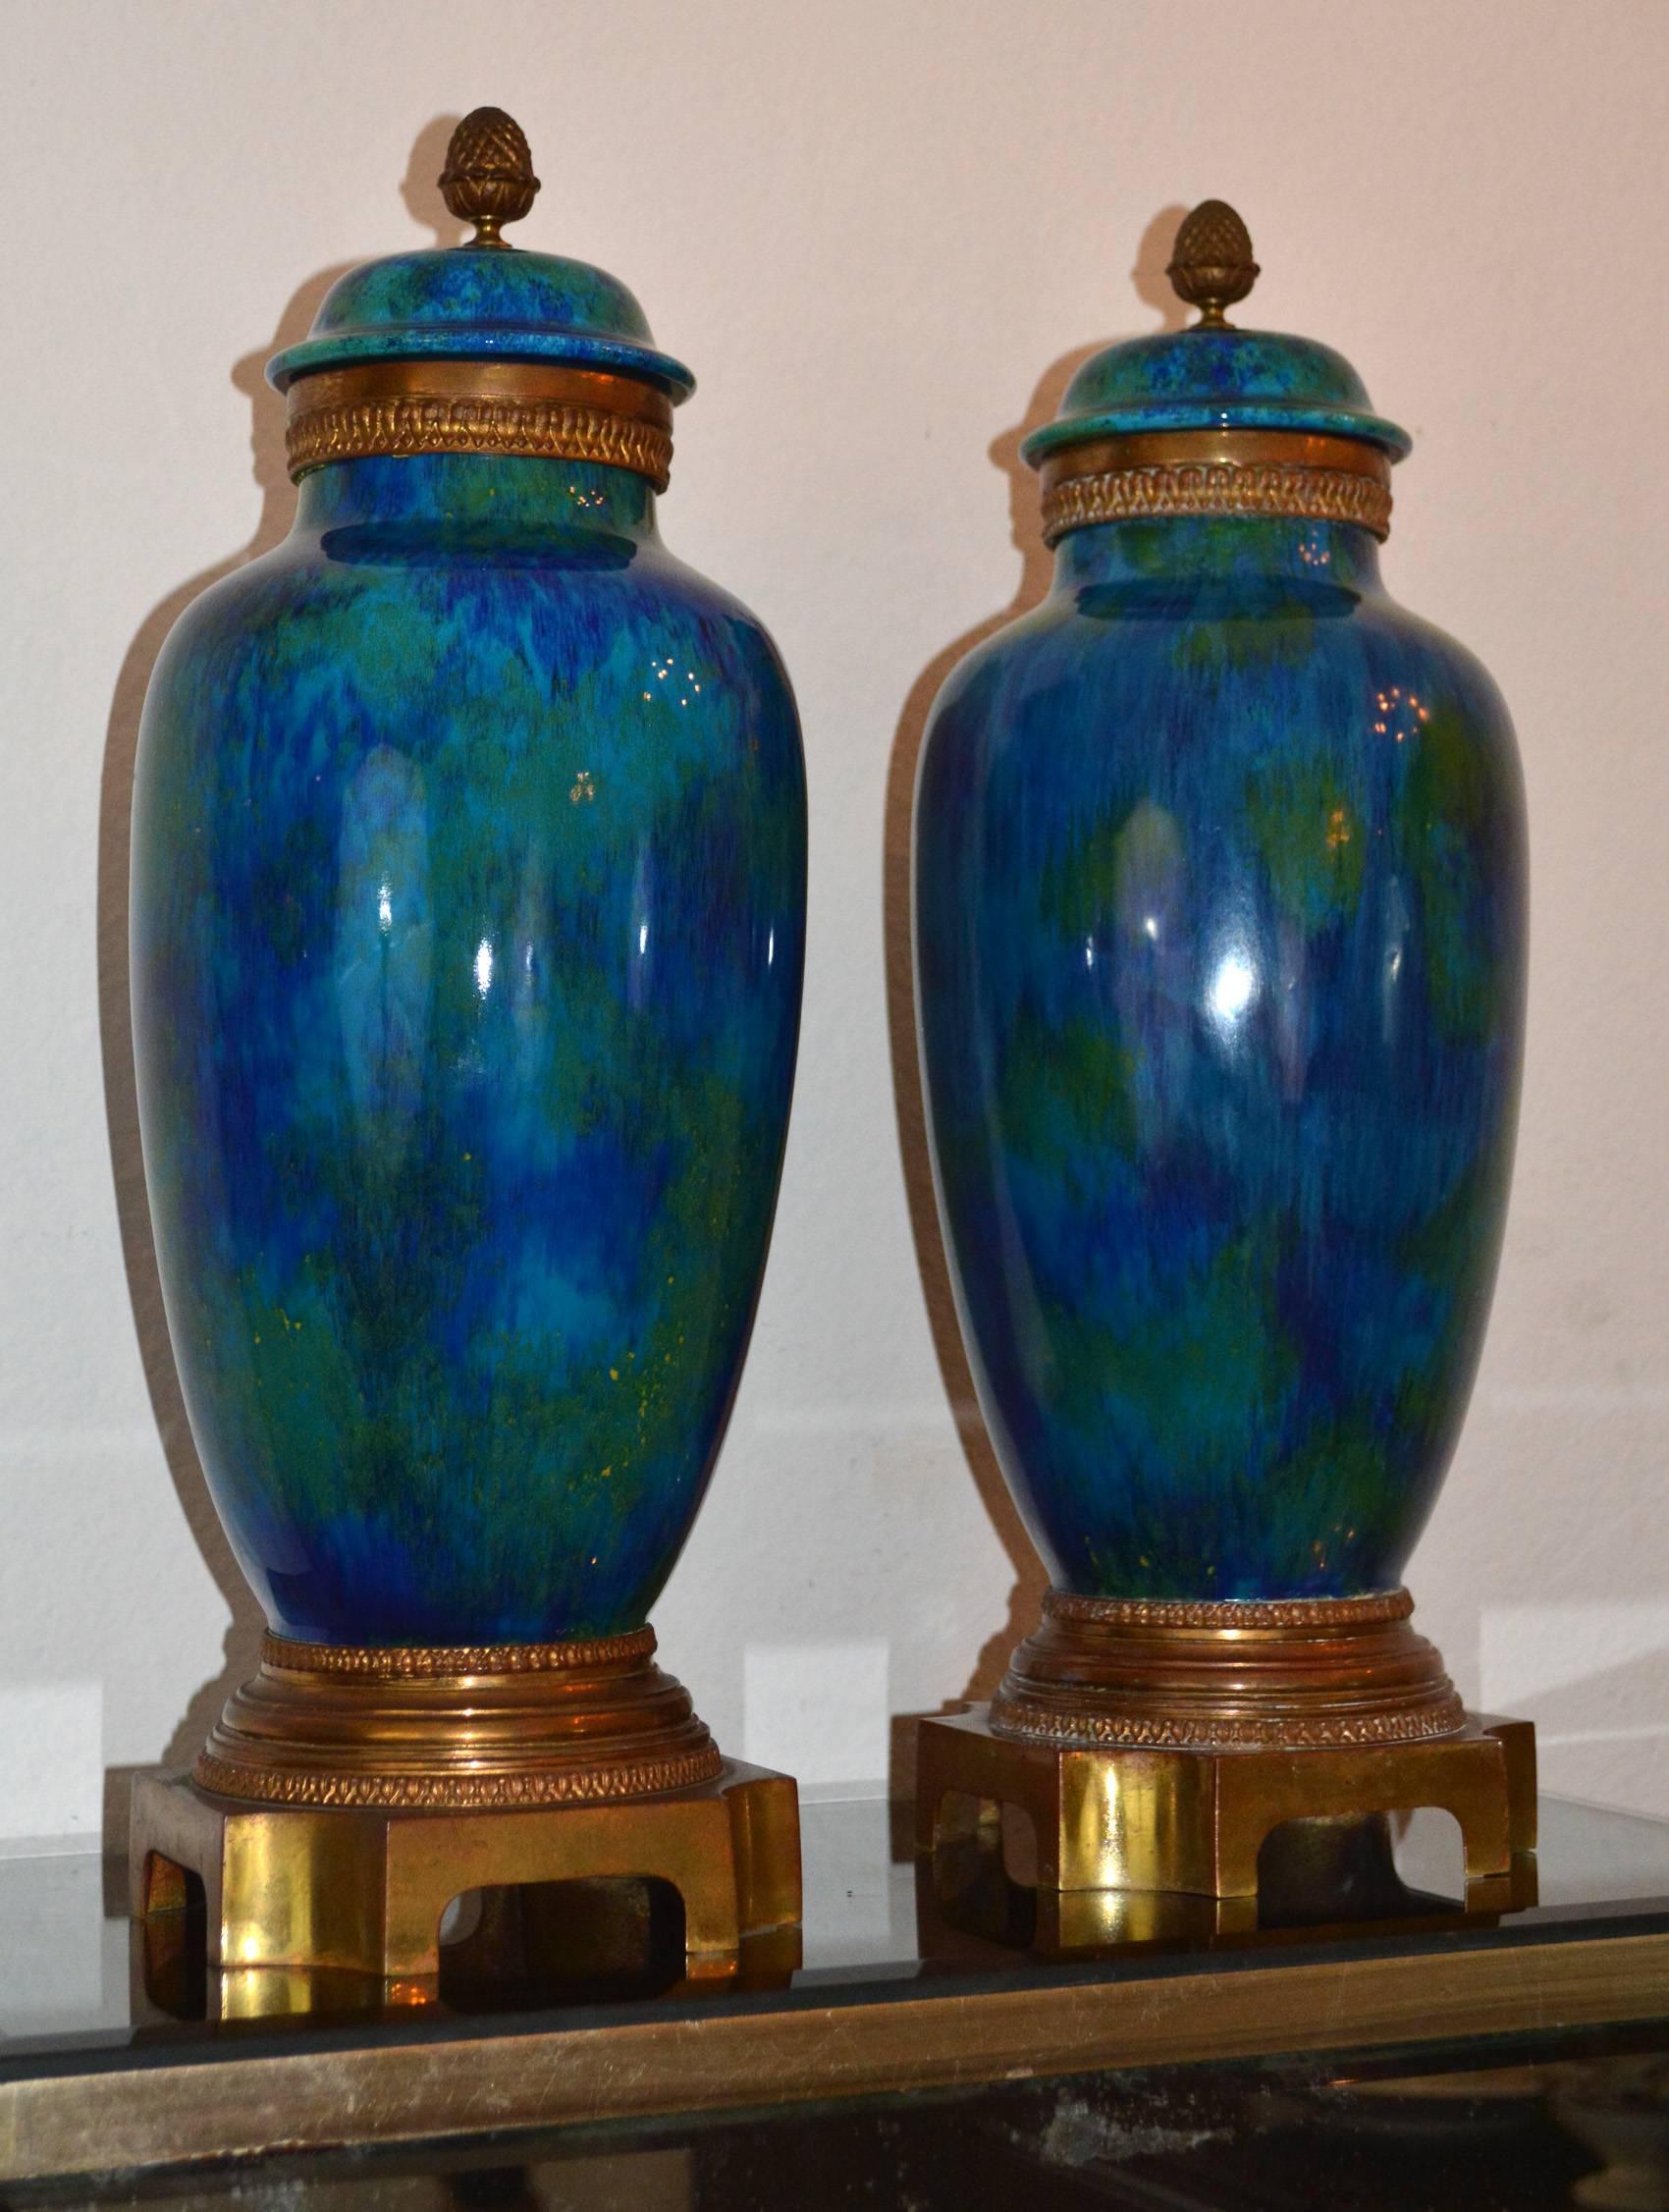 Pair of Art Deco vases of baluster form with covers. A beautiful glaze in various blue, aqua, green and gold tones. The vase is raised on gilt bronze feet and marked C.H Sevres. These vases are a rare and very Fine example of French Art Deco dated